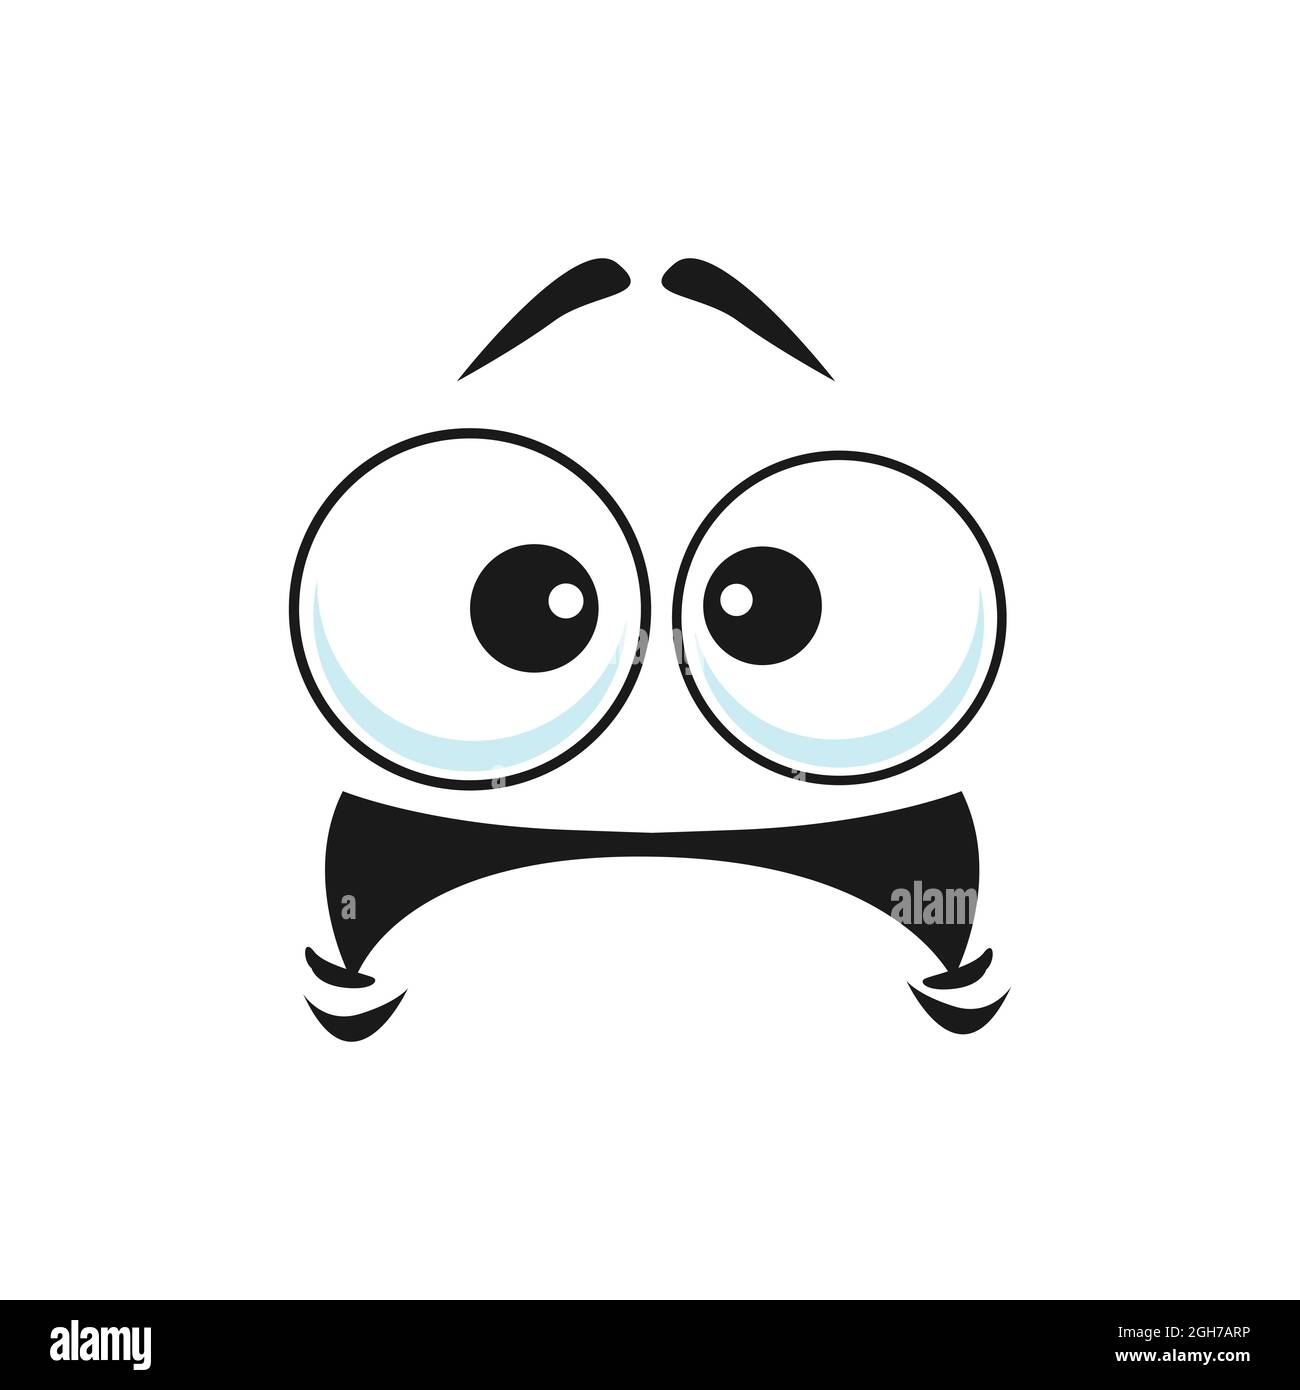 Image Details INH_18984_46595 - Emoji with shocked facial expression  isolated face with eyes in different sides. Vector scared or surprised  smiley, terrified or frightened emoticon. Afraid emoji with big pop-eyes,  cartoon character.